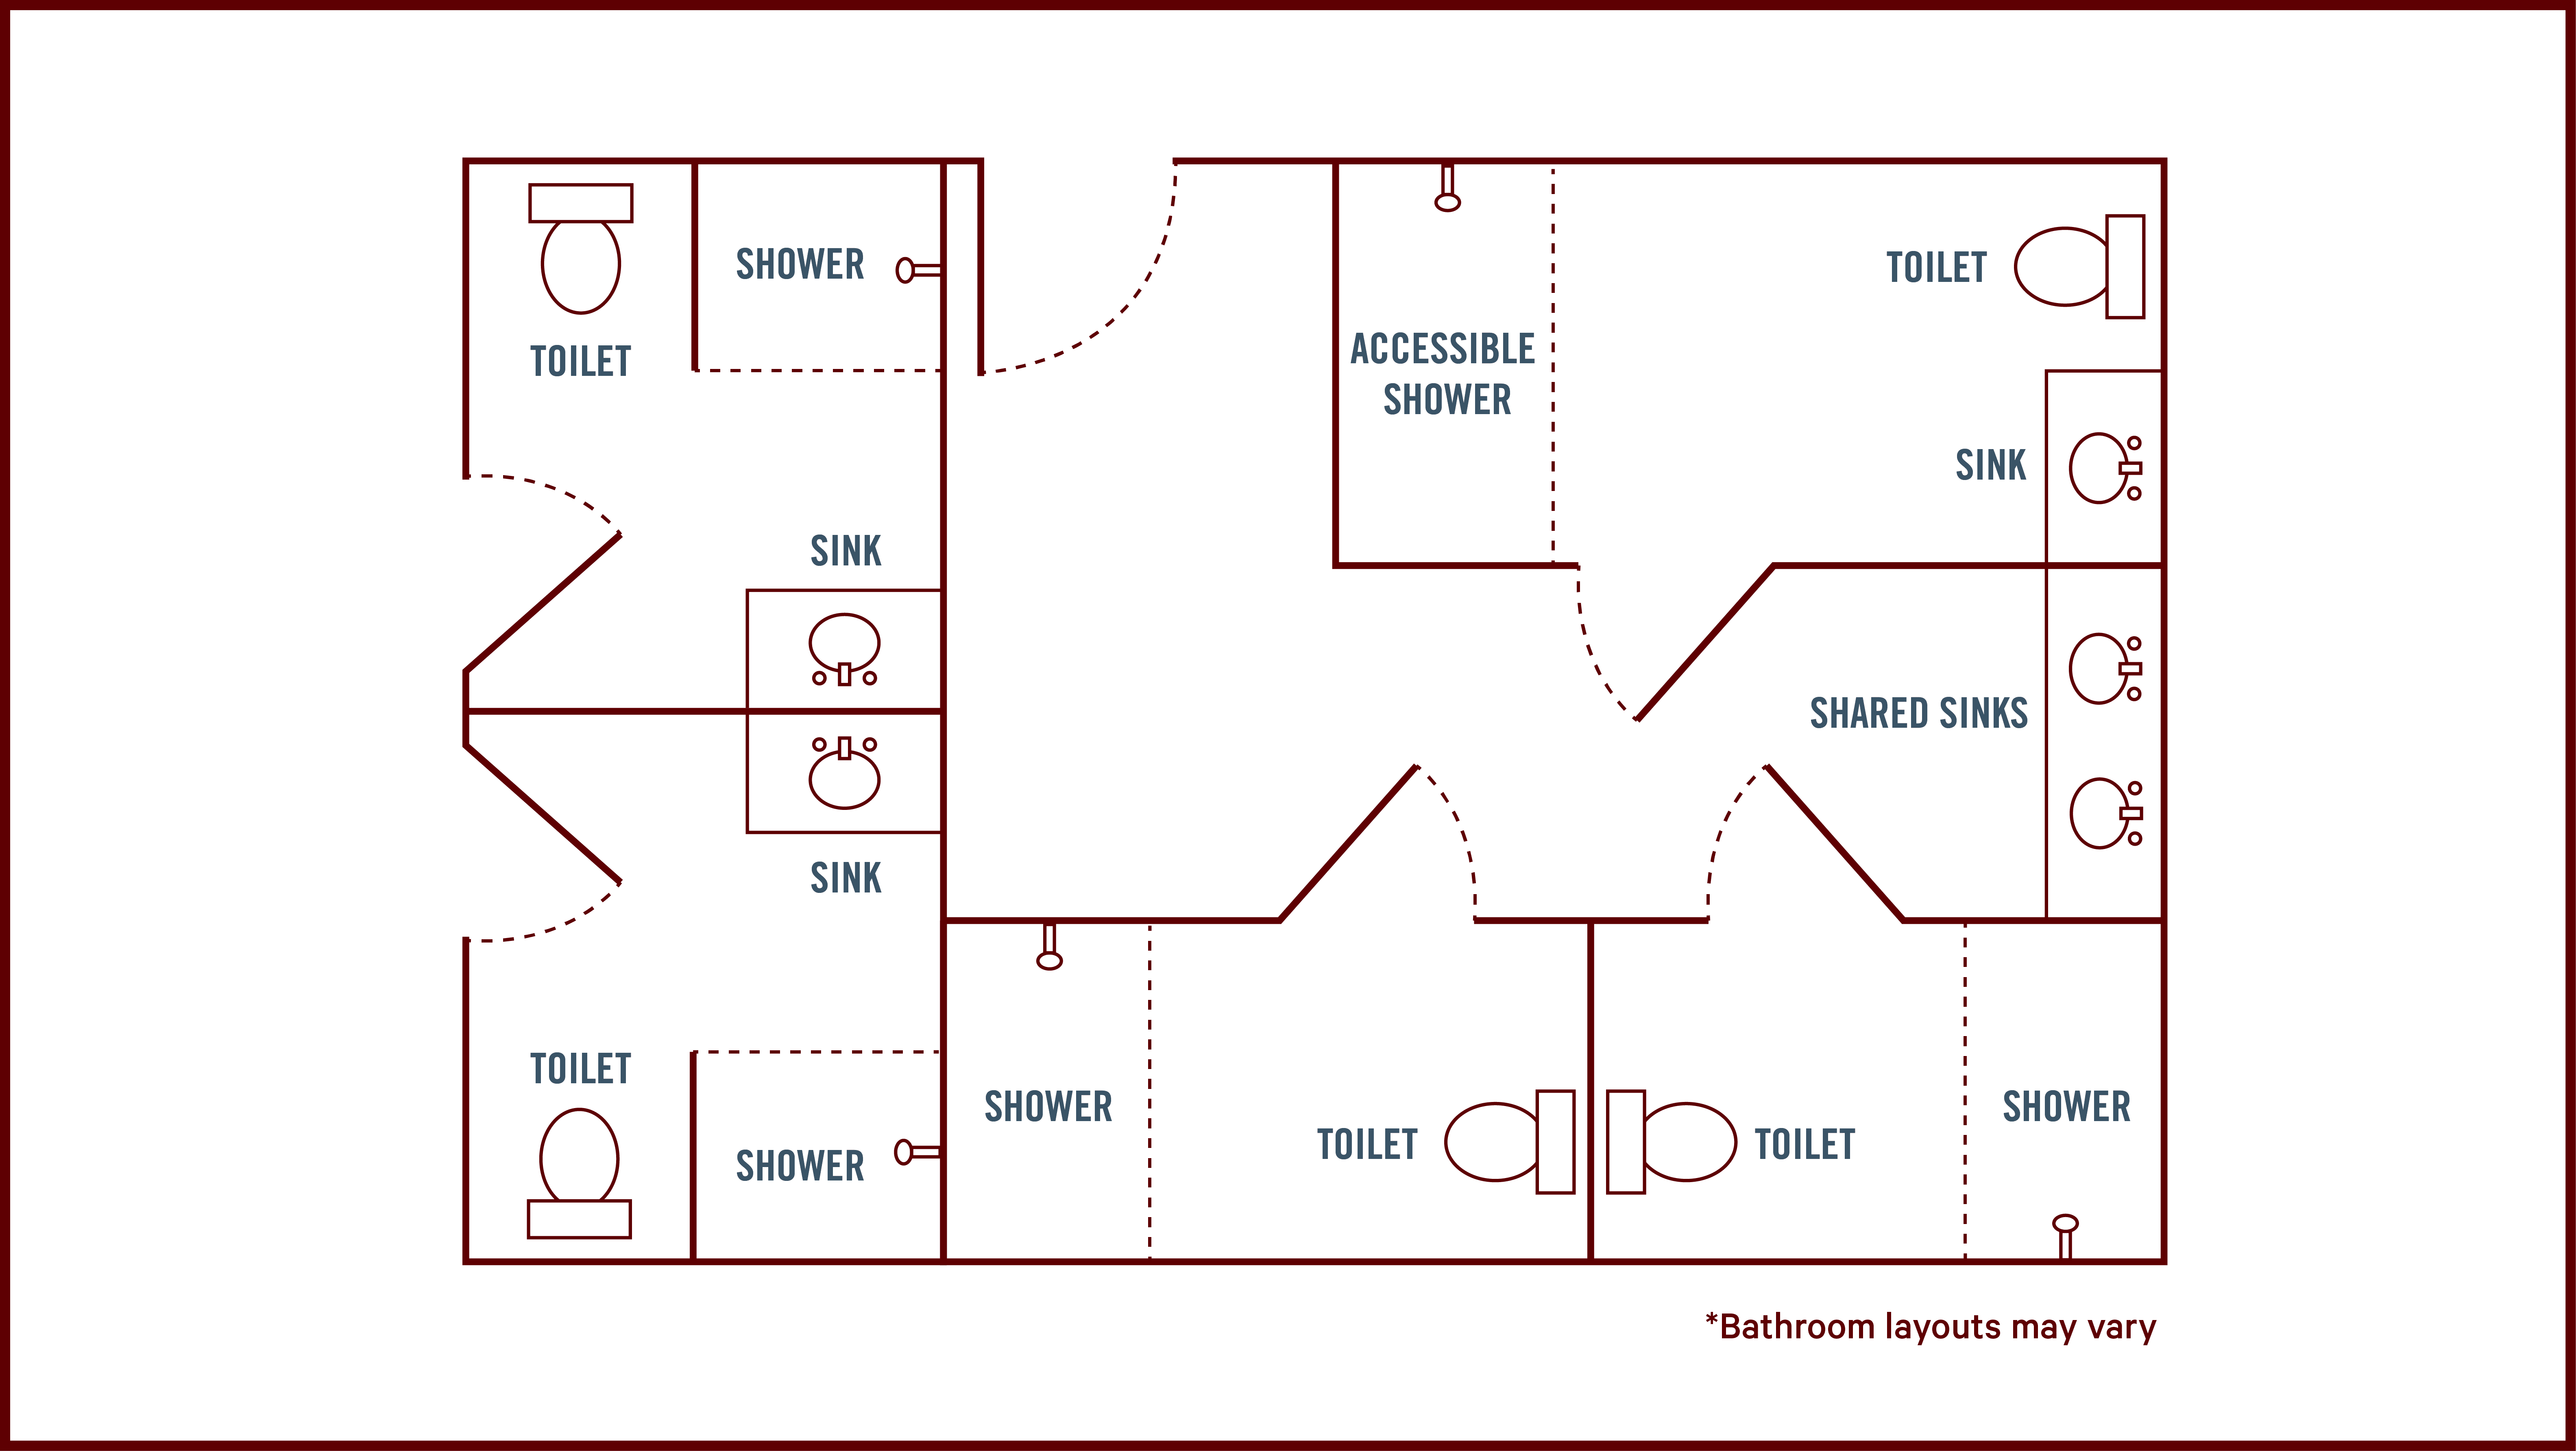 outline of bird's eye view of single user private bathroom layout with 3 stalls and shared sinks